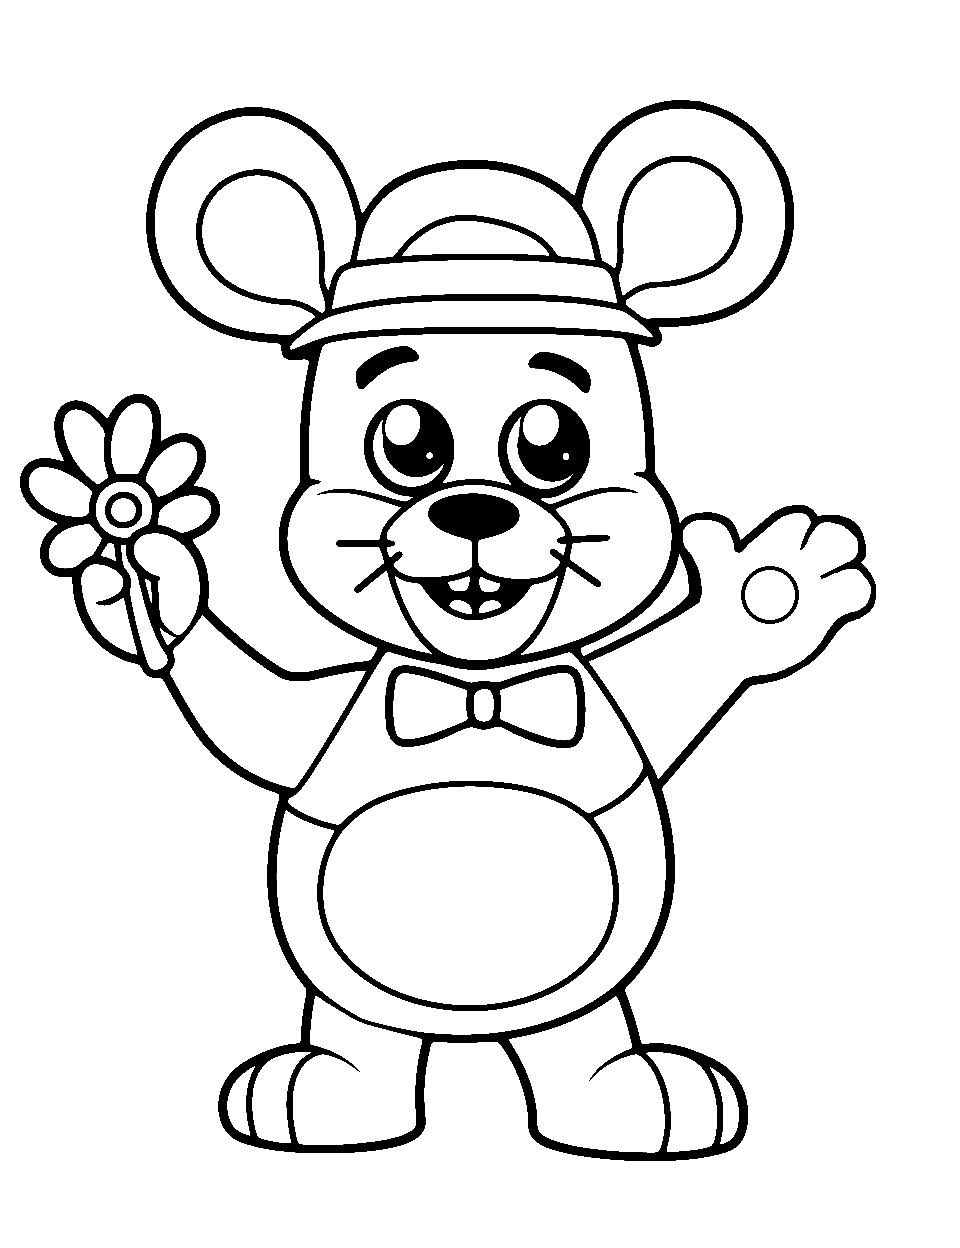 Waving Bonnie Coloring Page - Toy Bonnie waving cheerfully.